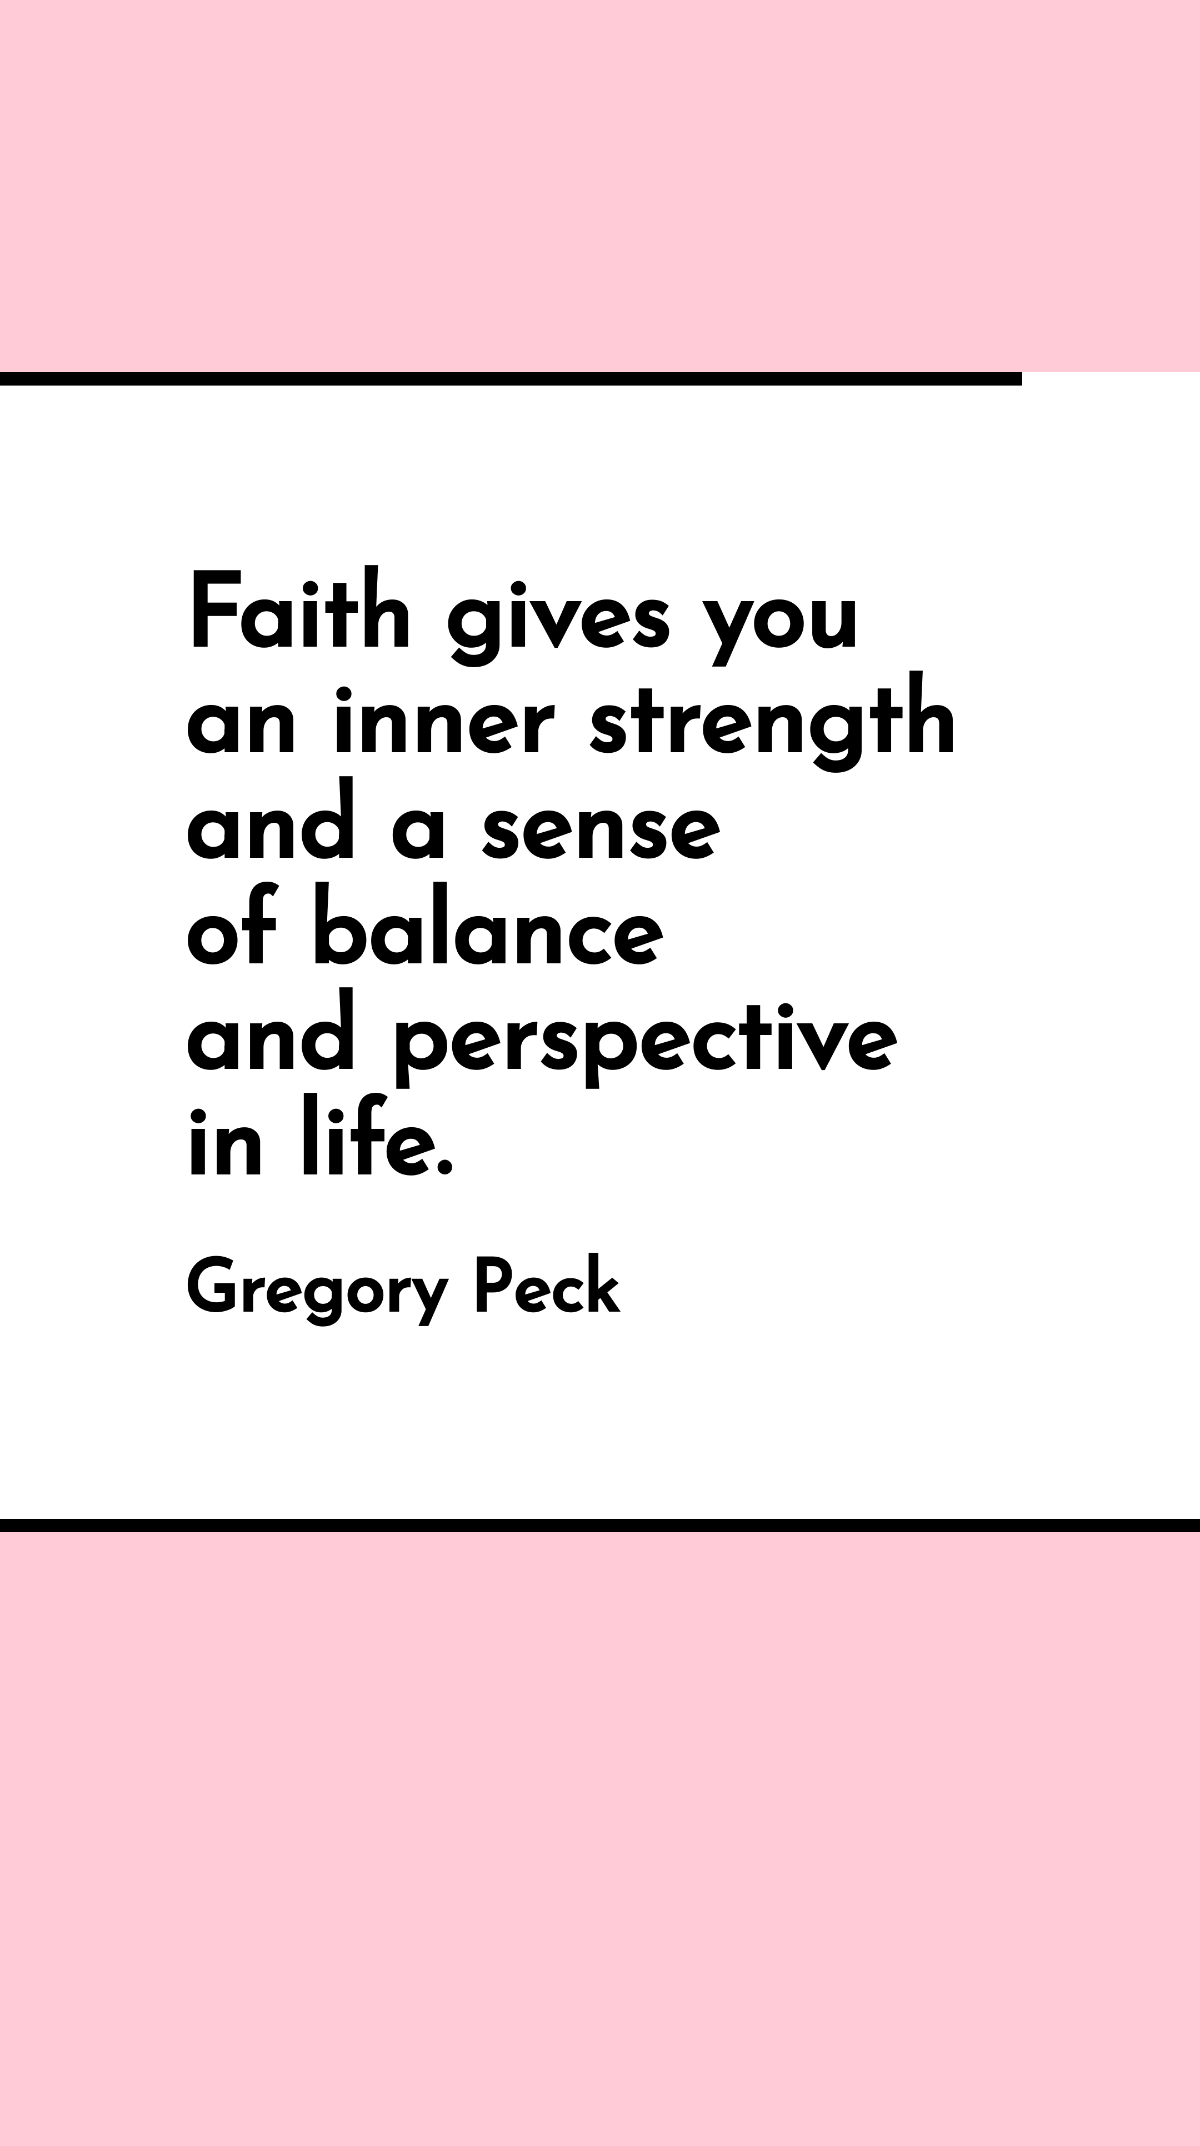 Gregory Peck - Faith gives you an inner strength and a sense of balance and perspective in life. Template